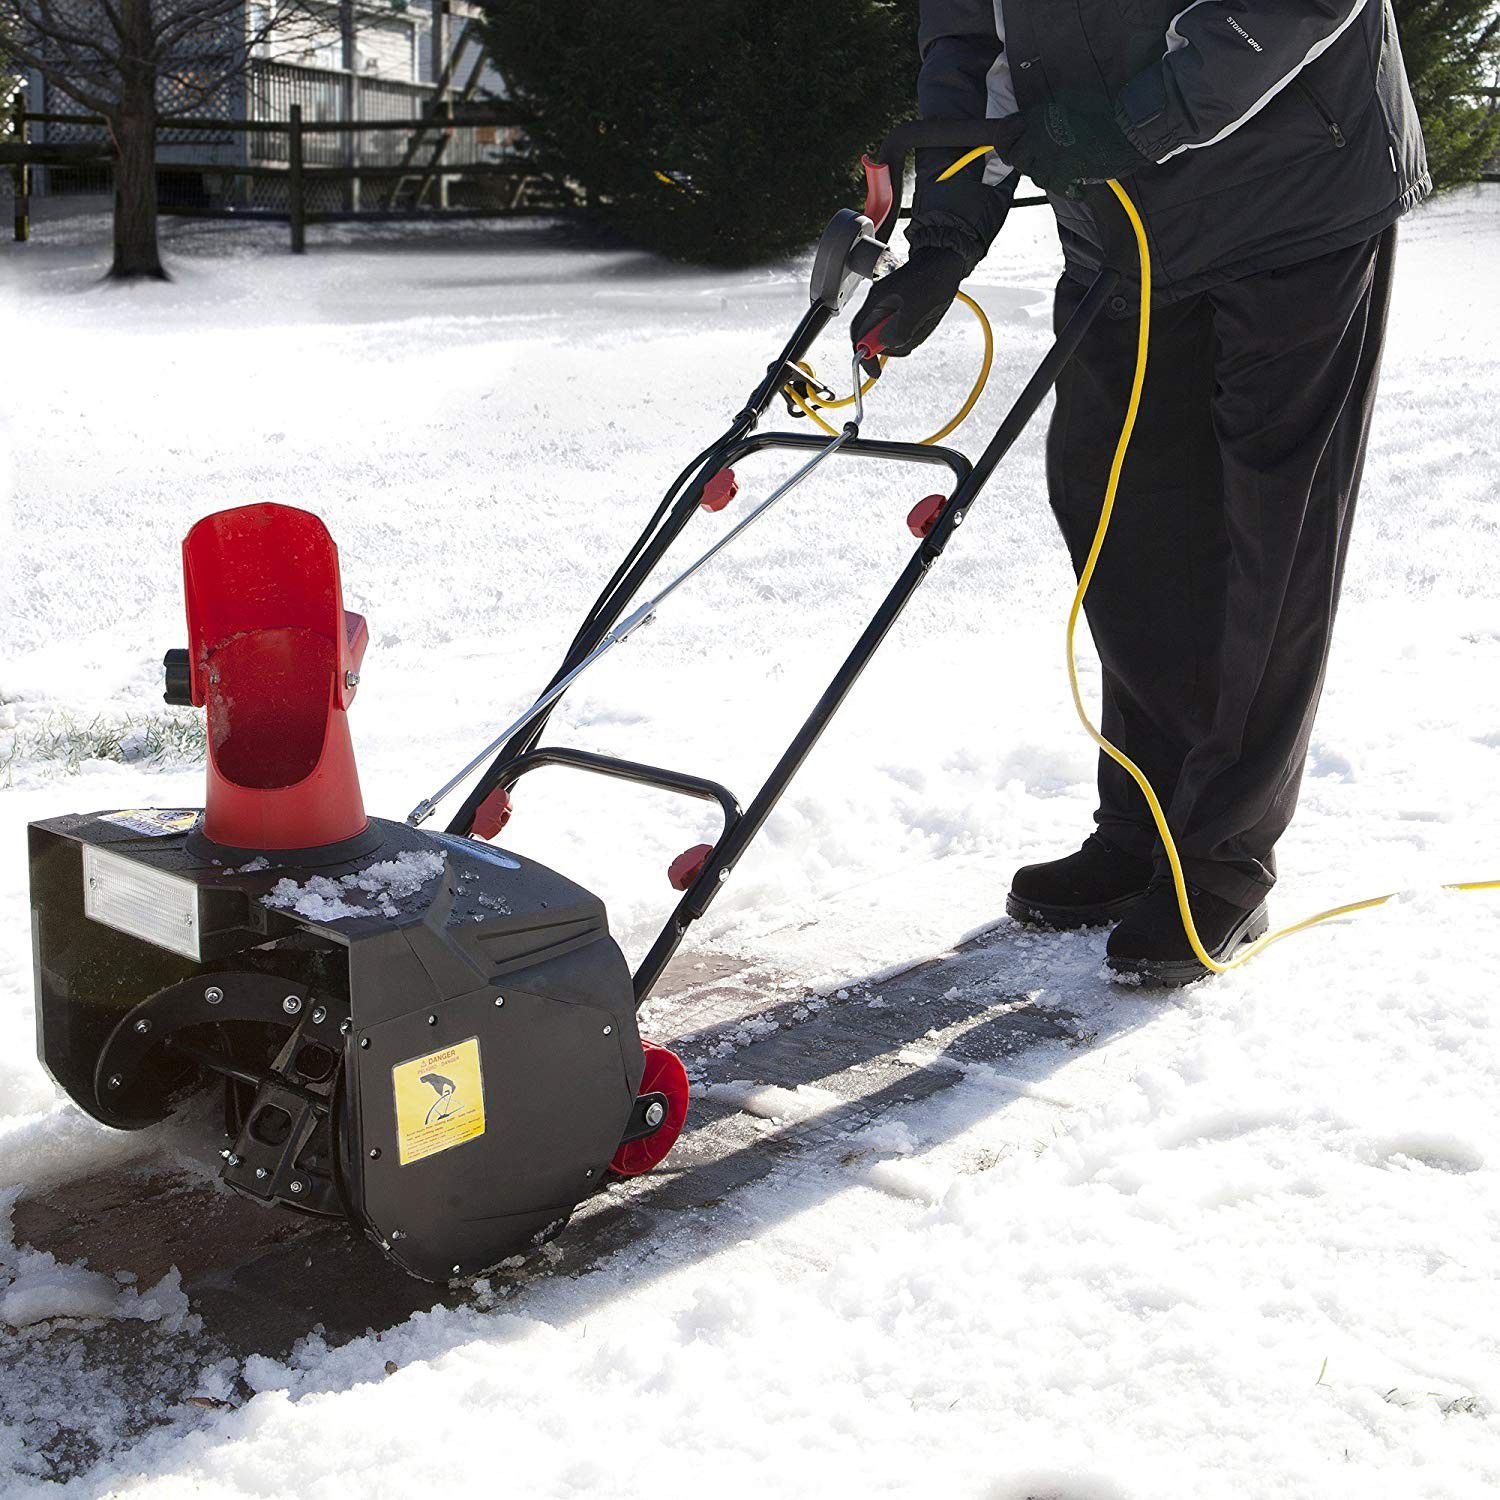 Snow Joe Max SJM988 18-Inch 13.5-Amp Electric Snow Thrower with Light in RED